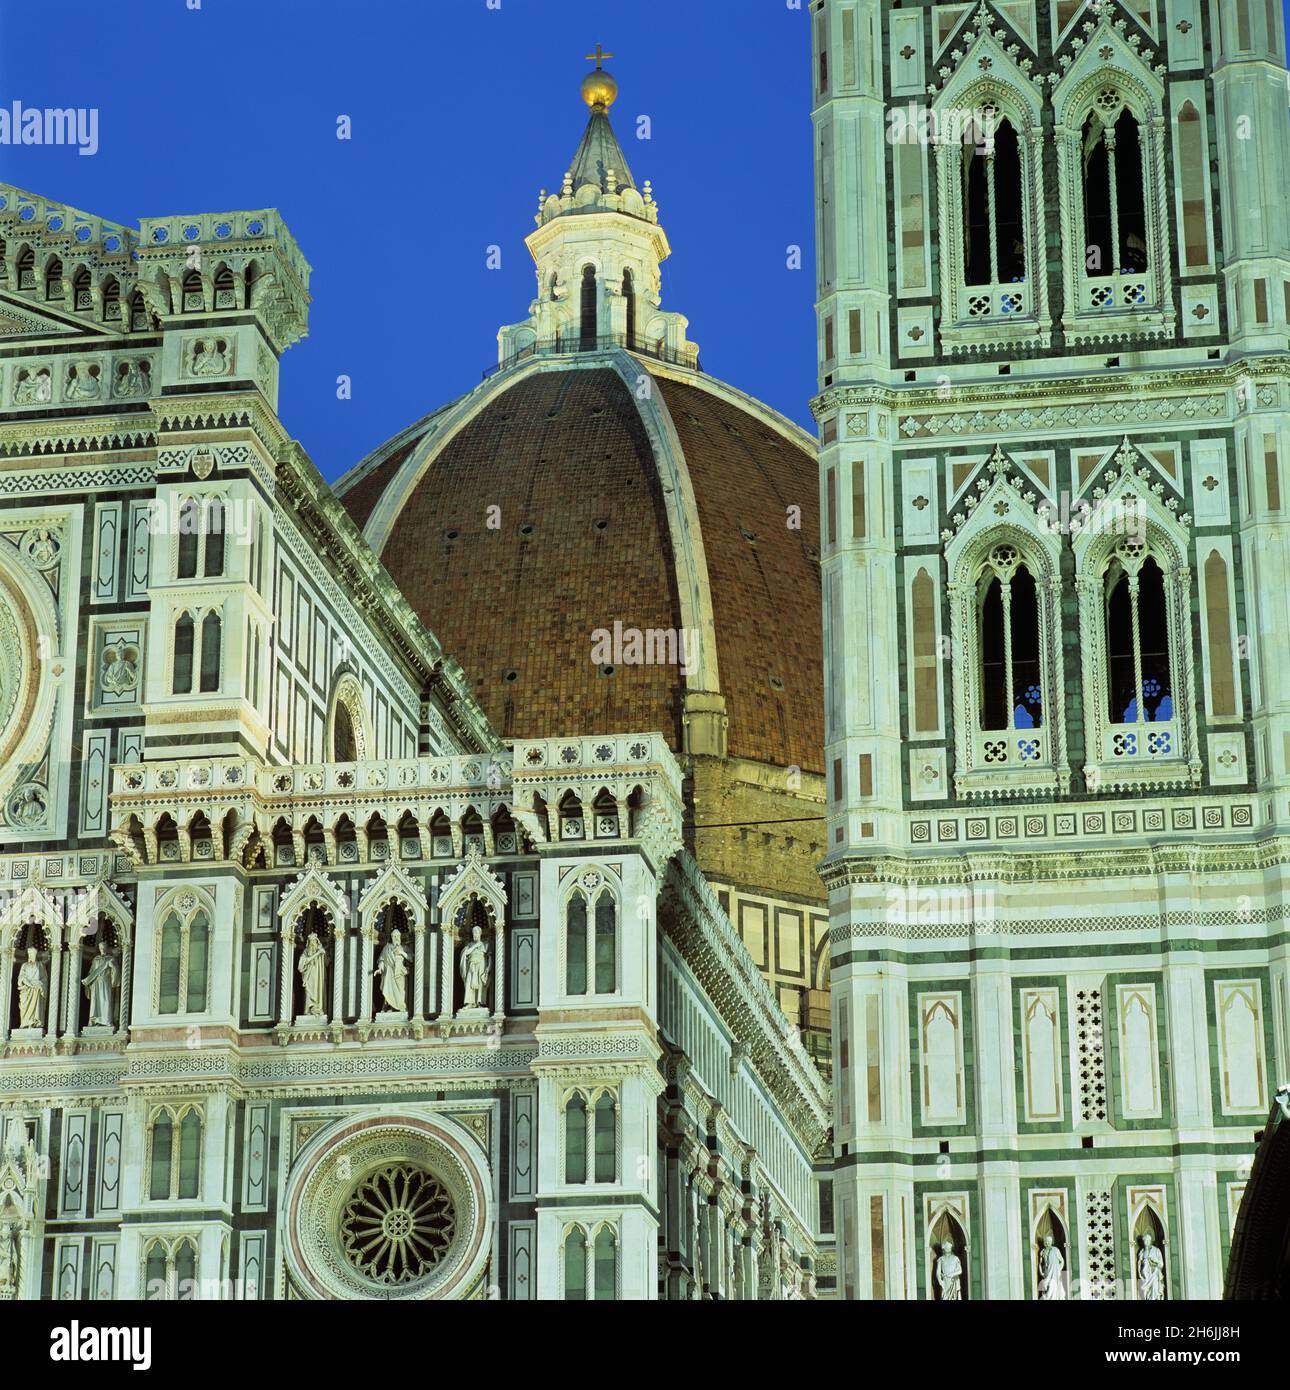 Brunelleschi's dome and exterior of the Duomo floodlit at night, UNESCO World Heritage Site, Florence, Tuscany, Italy, Europe Stock Photo